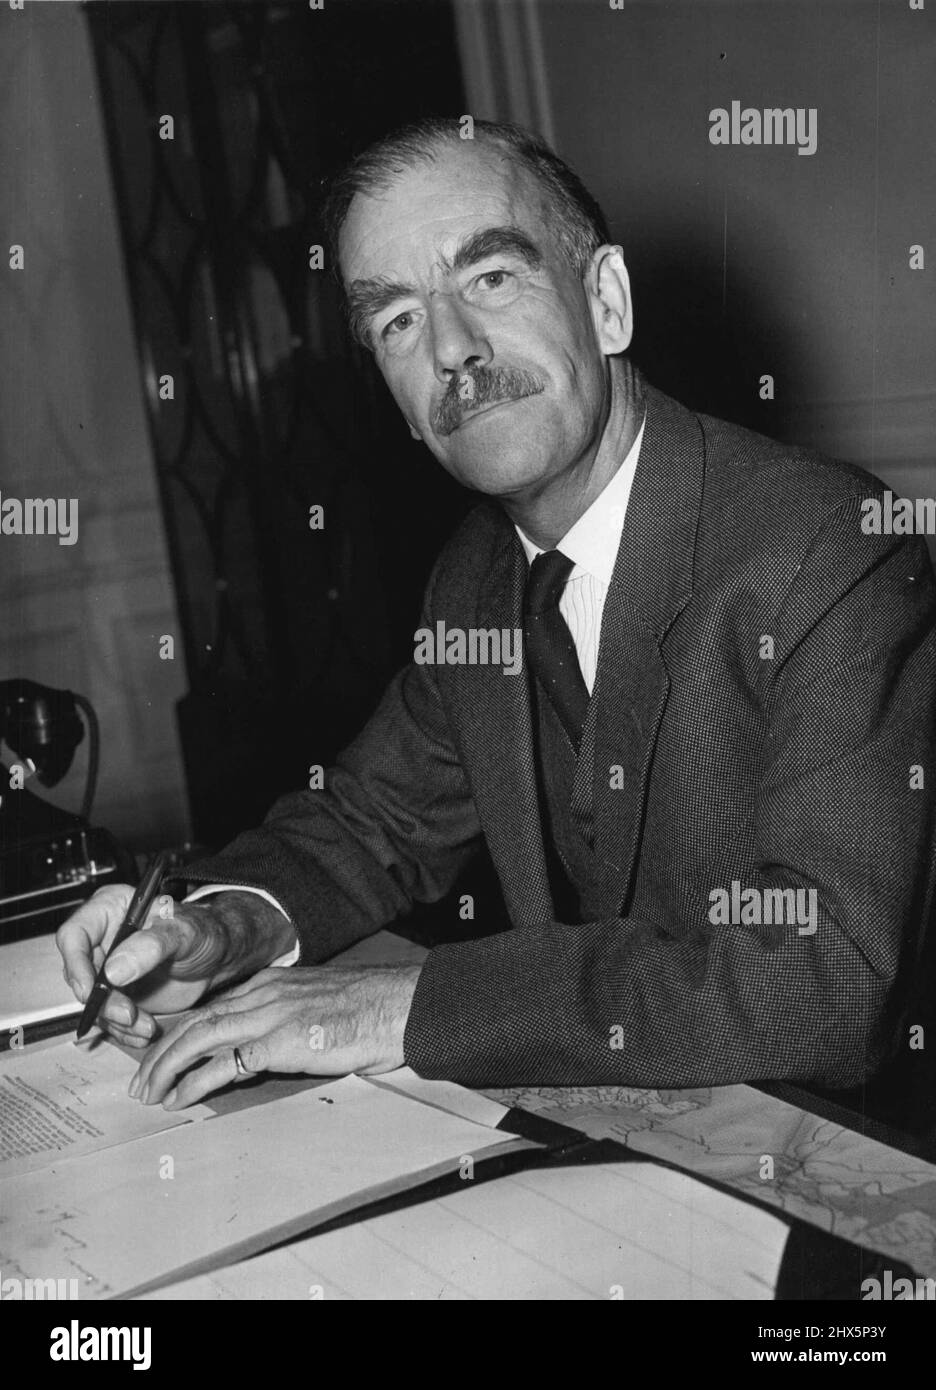 Lt. Gen. Sir Brian Robertson - Britain. December 17, 1953. (Photo by Daily Express Pictures). Stock Photo